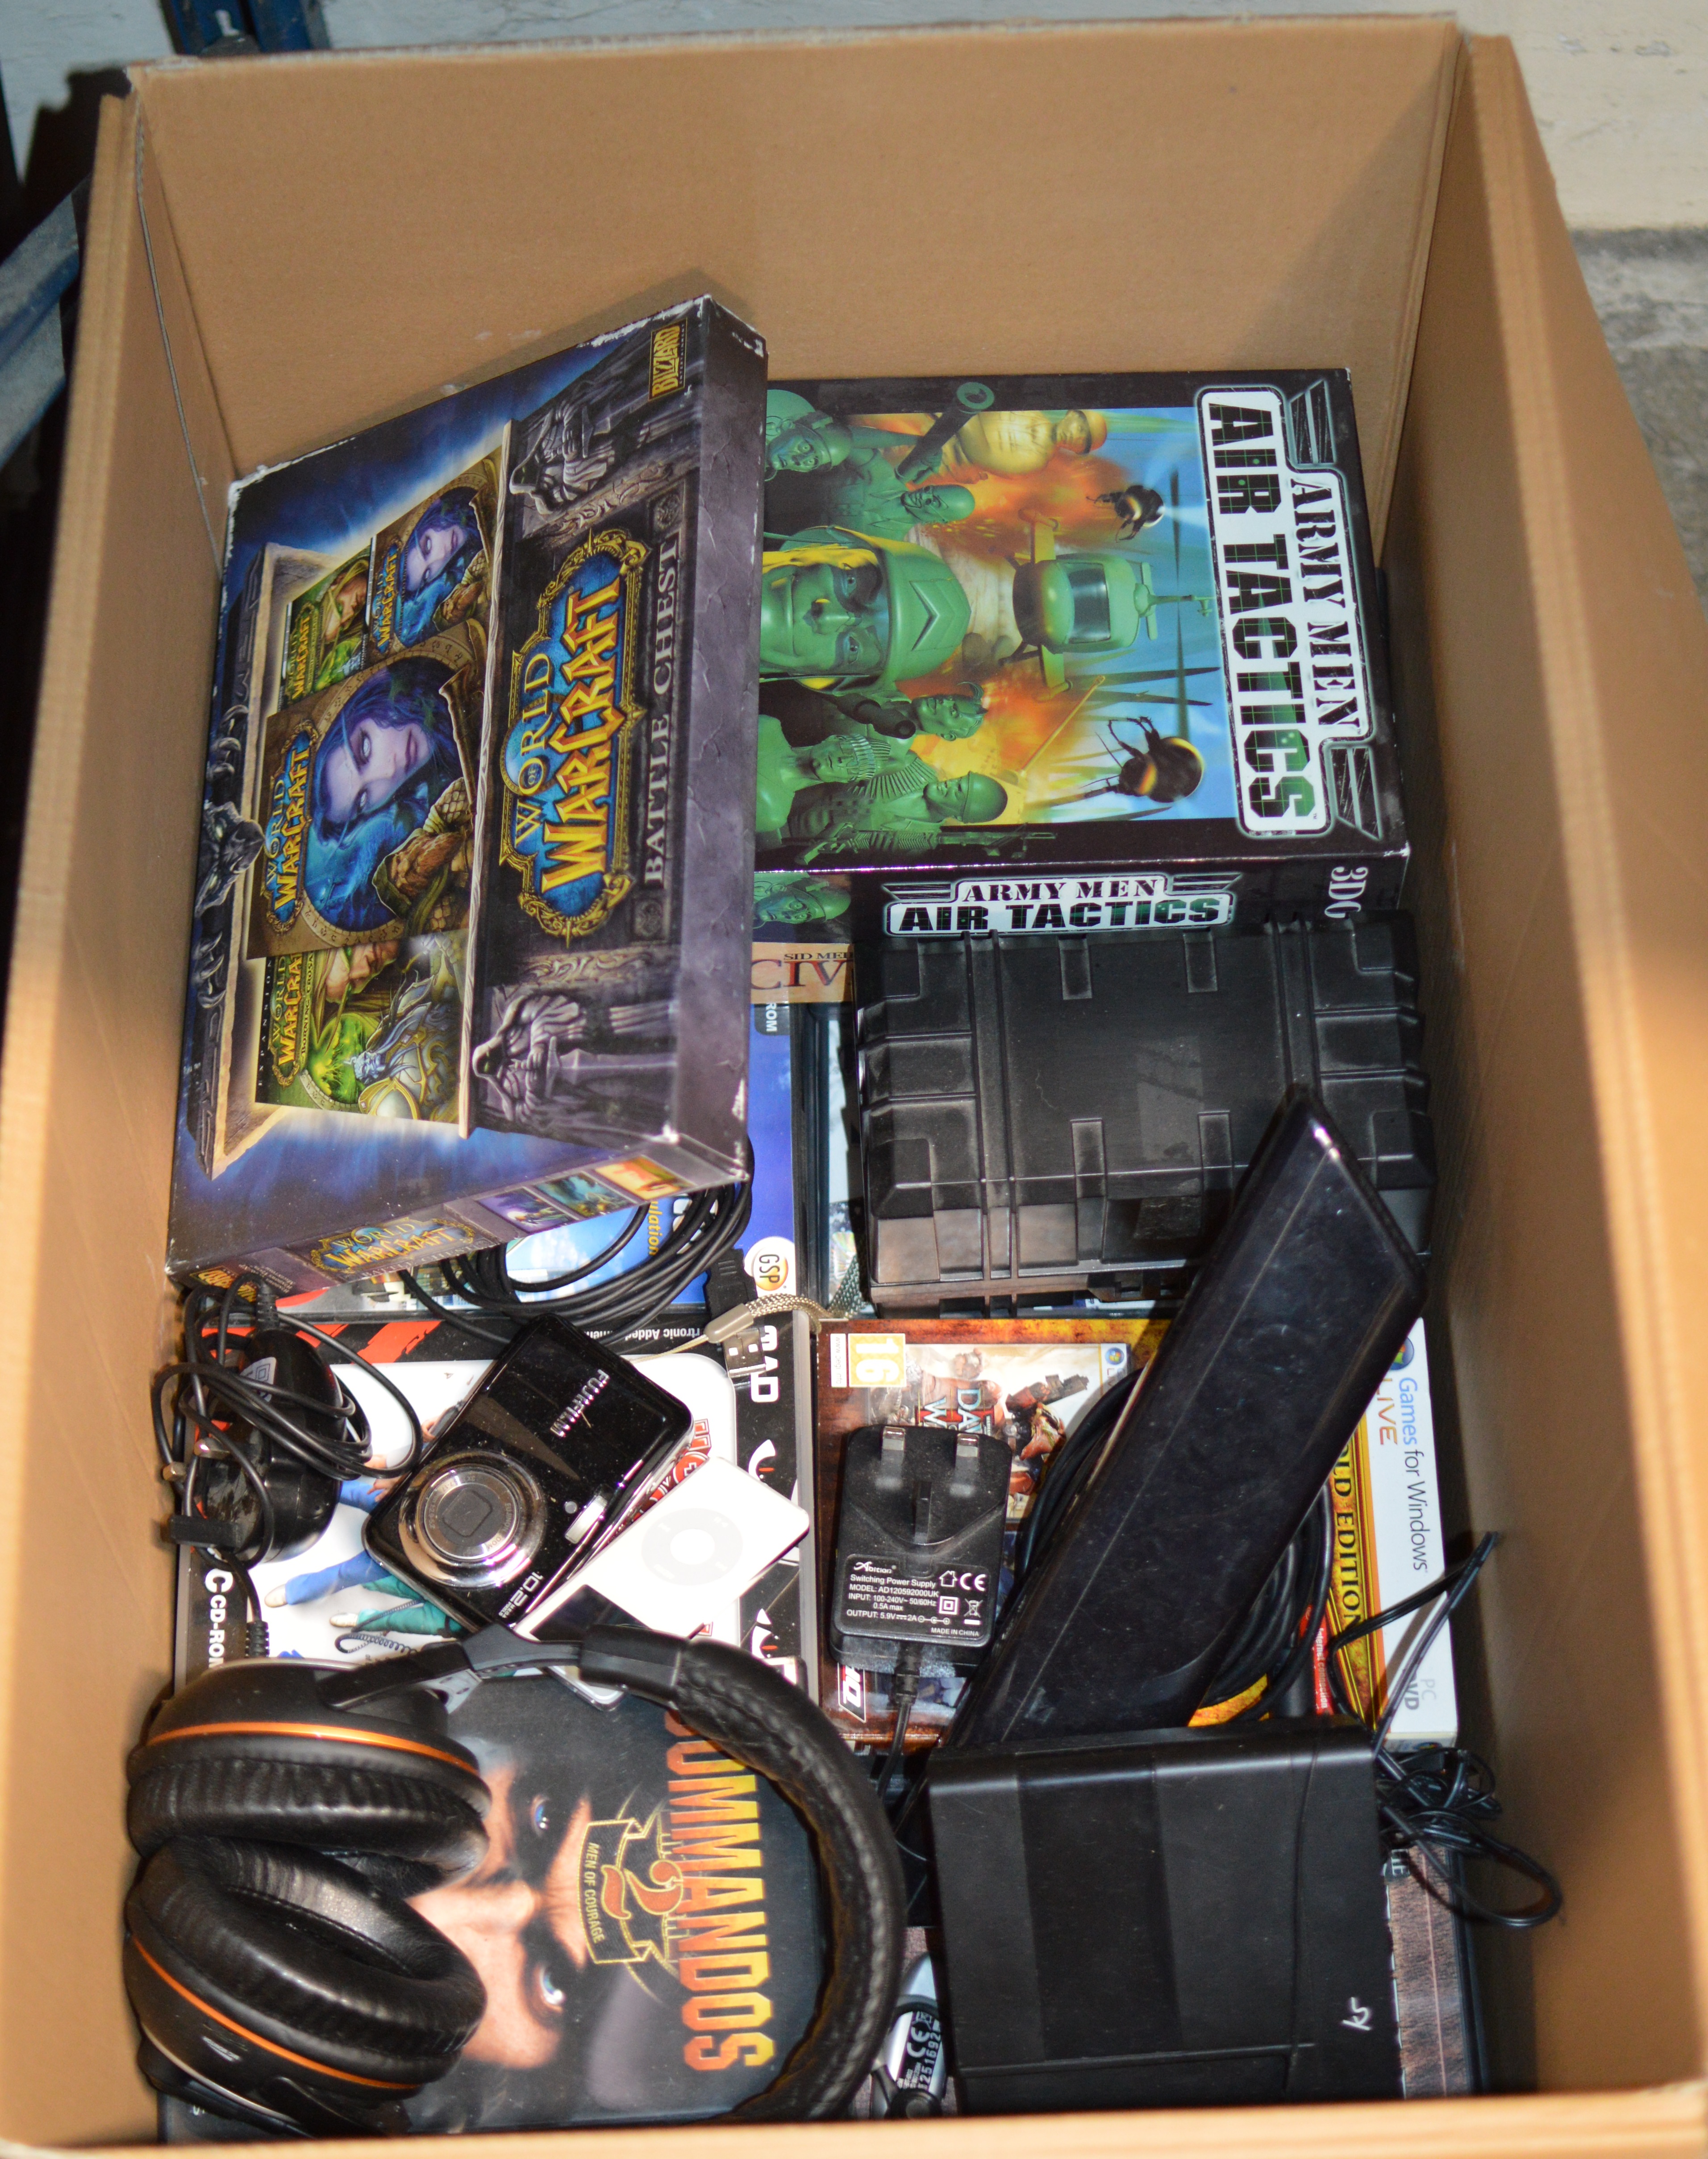 BOX WITH VARIOUS PC GAMES & ACCESSORIES, DIGITAL CAMERA, IPOD ETC